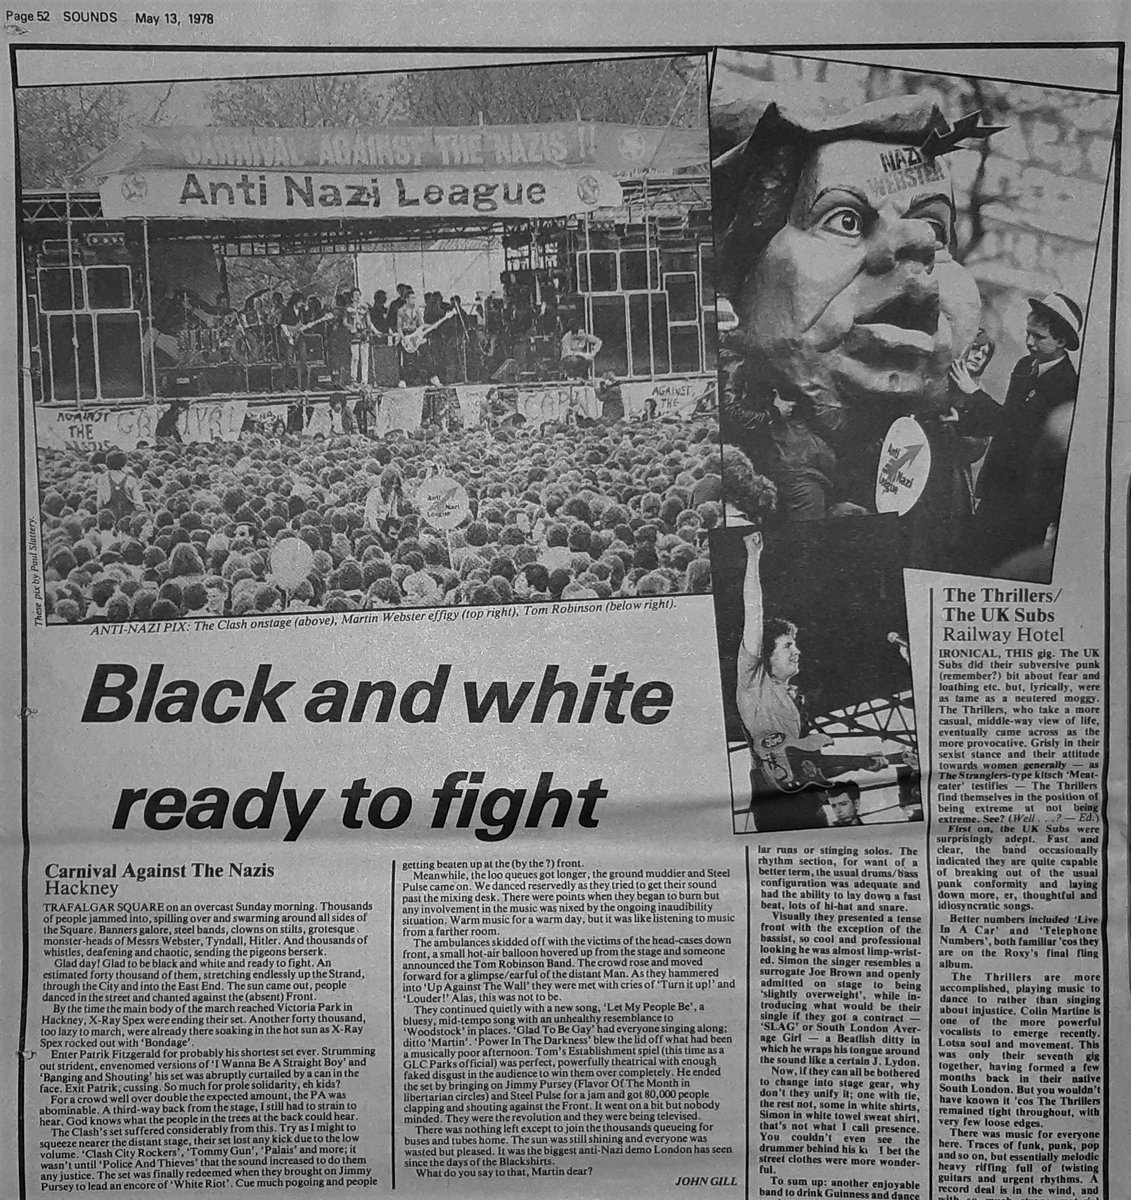 The Carnival Against The Nazis gig in Hackney reviewed by John Gill in Sounds 13th, May 1978, including X-Ray Spex, The Clash, Steel Pulse and Tom Robinson Band. @TheClash @gladtobegay @freshnet